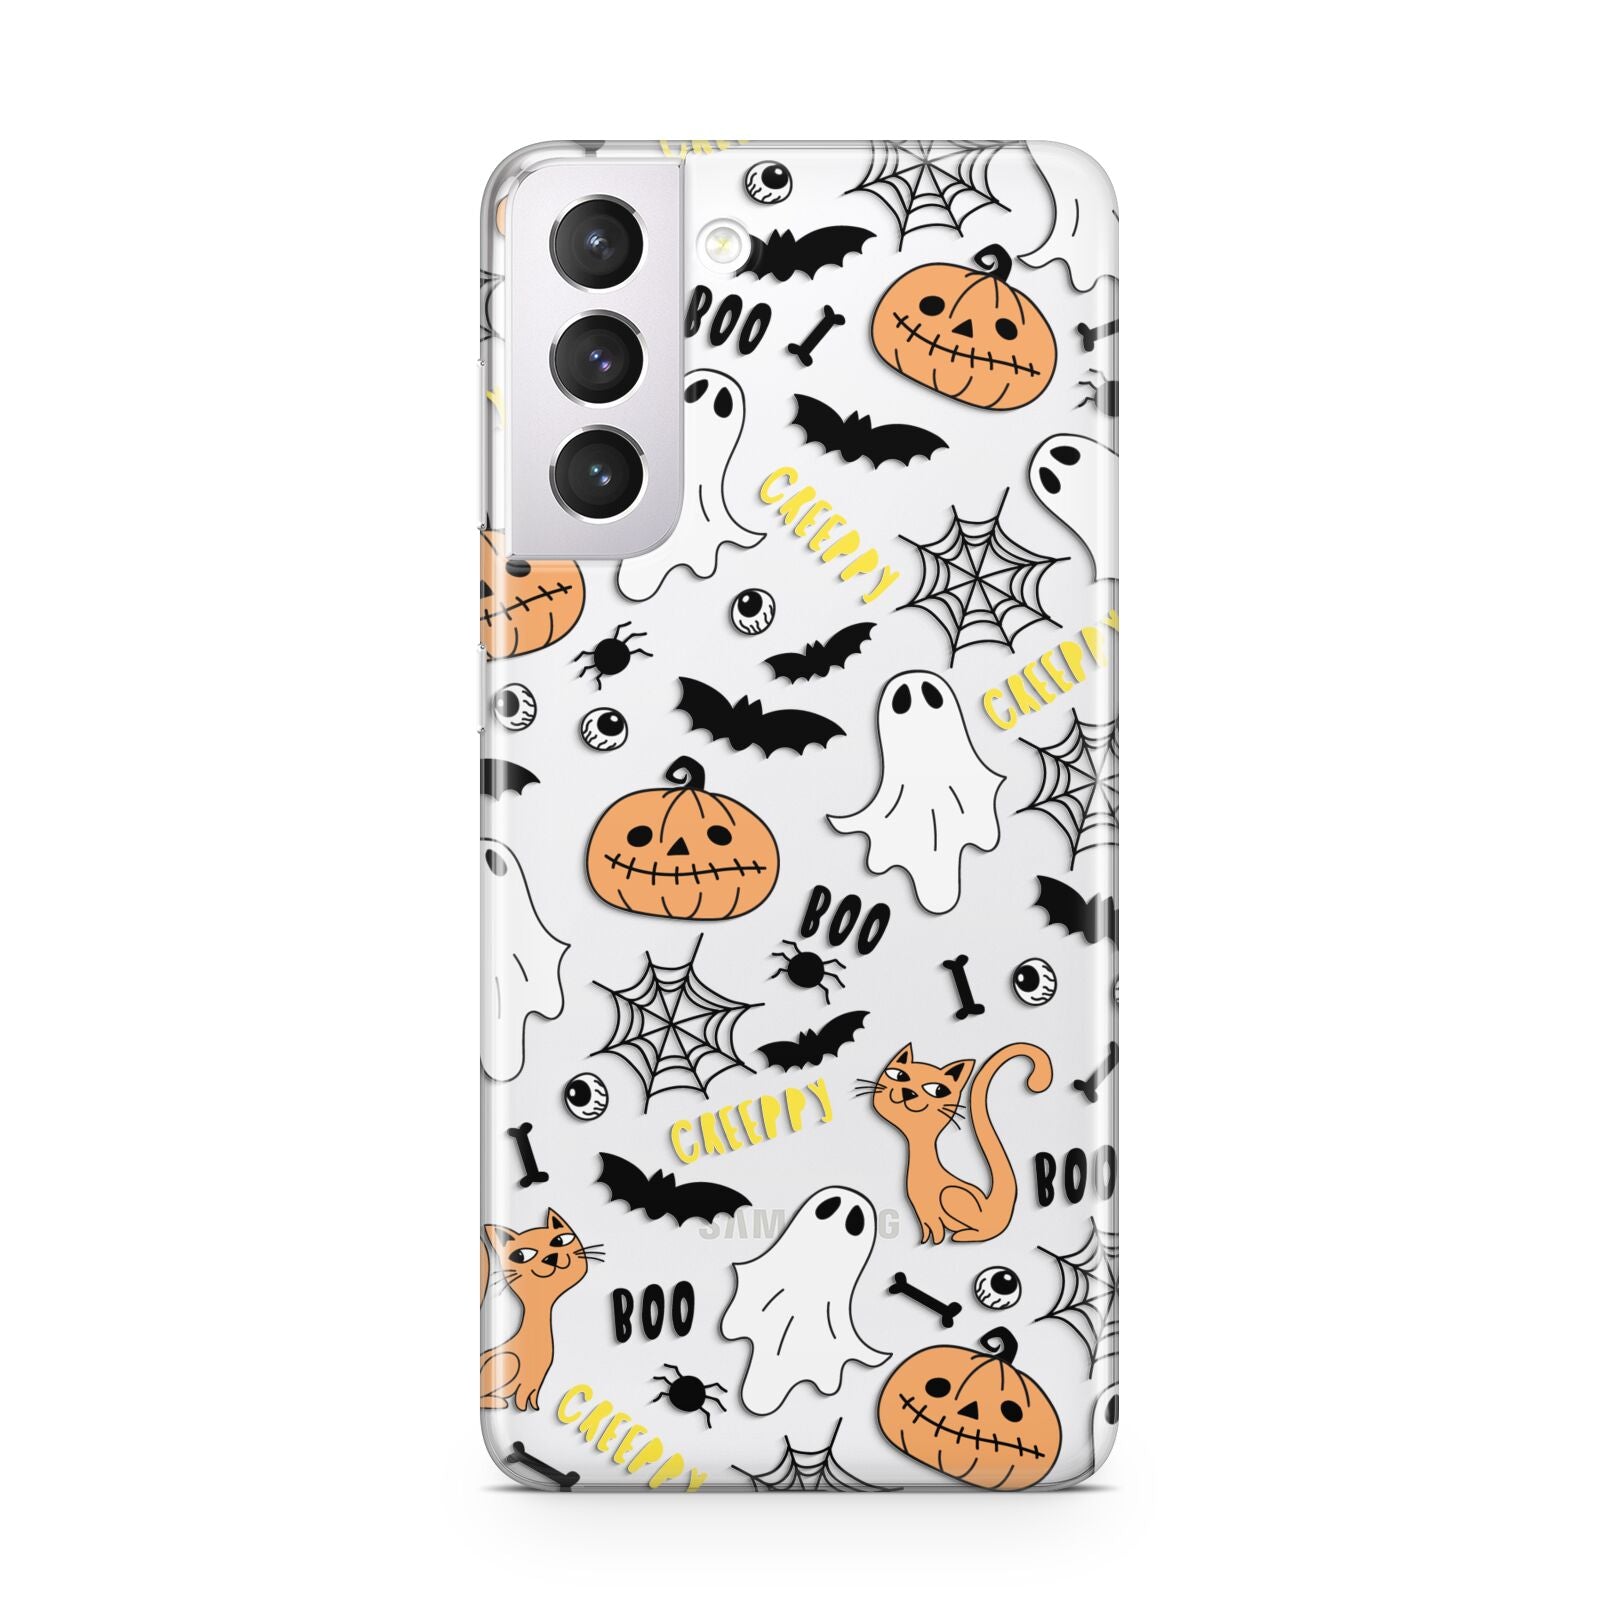 Cute Colourful Halloween Protective Samsung Galaxy Case – Dyefor